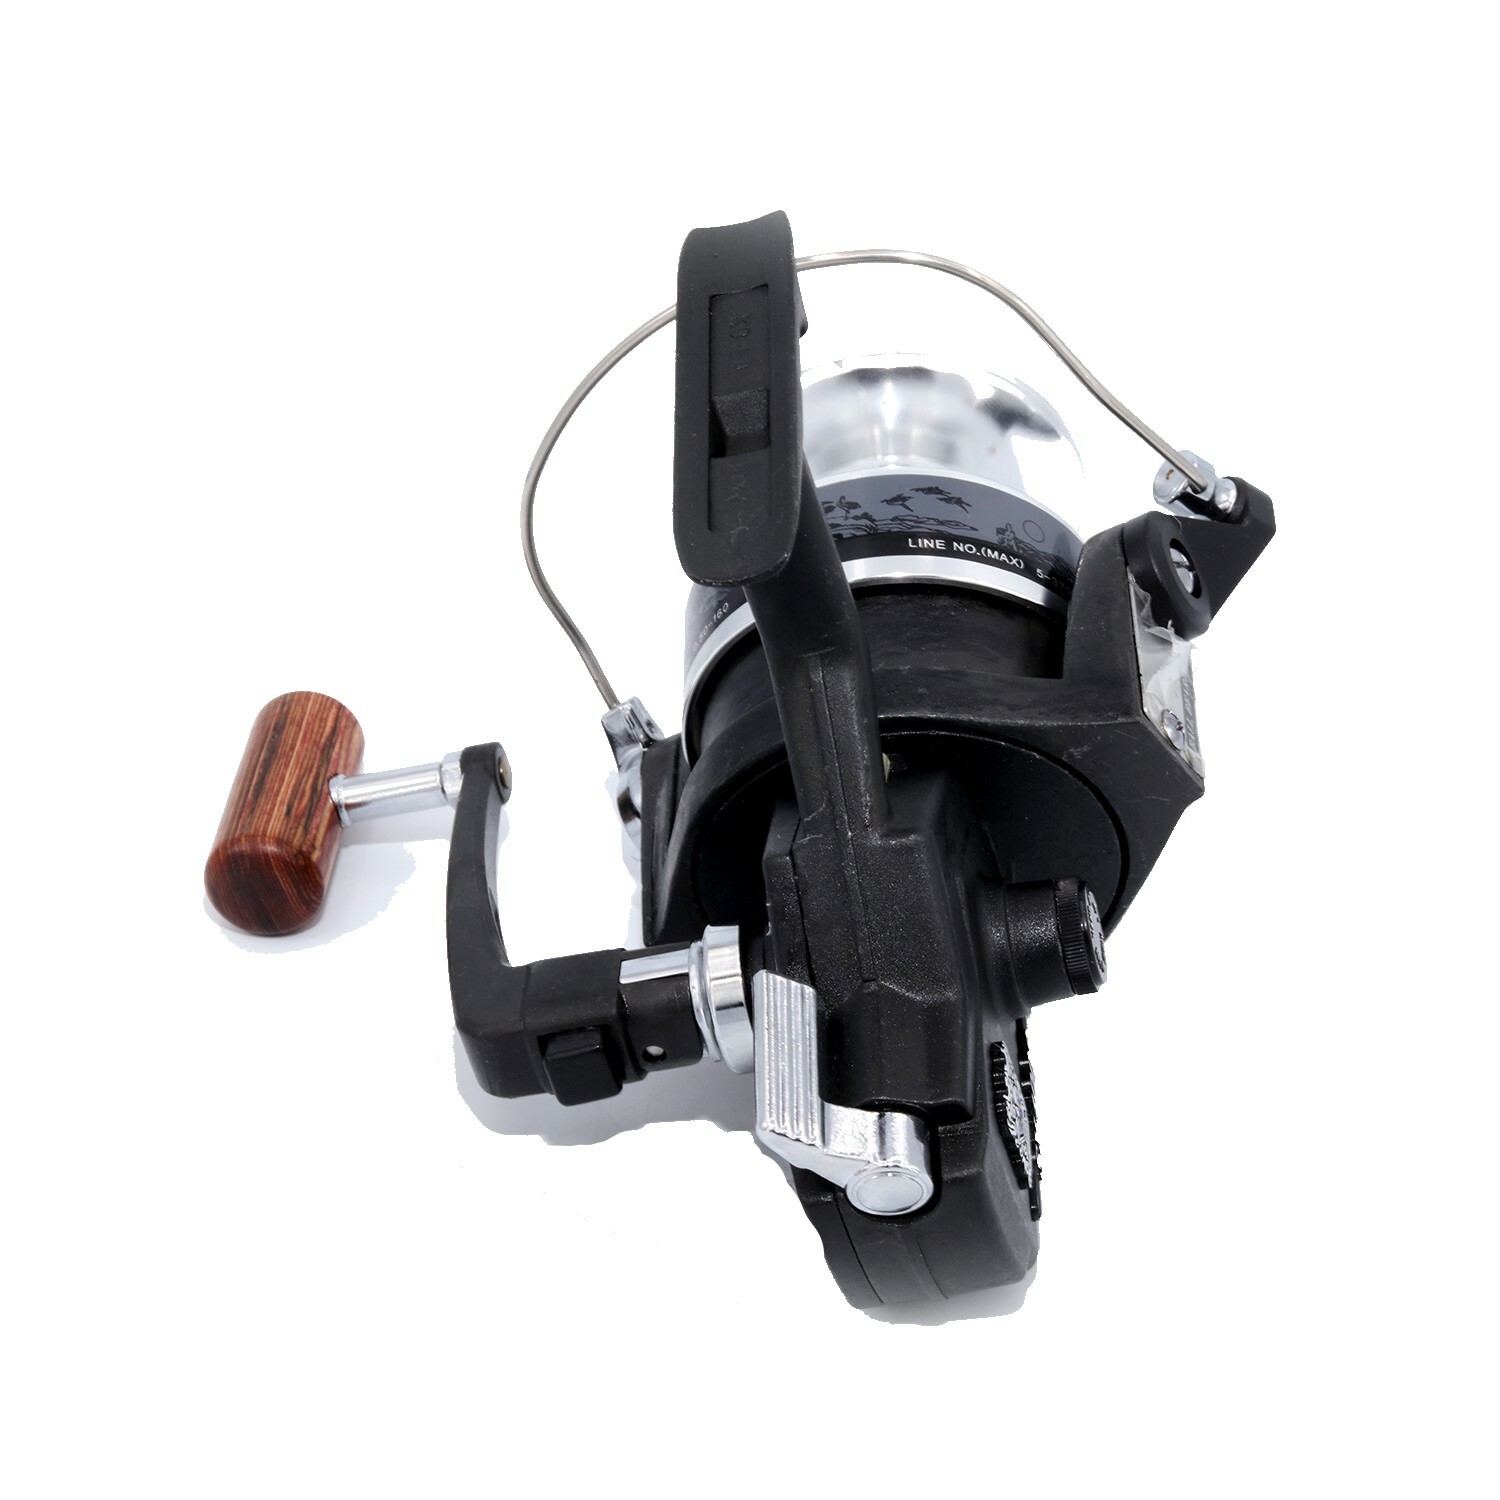 Banax SI Spinning Reel - Large Size for Saltwater & UK